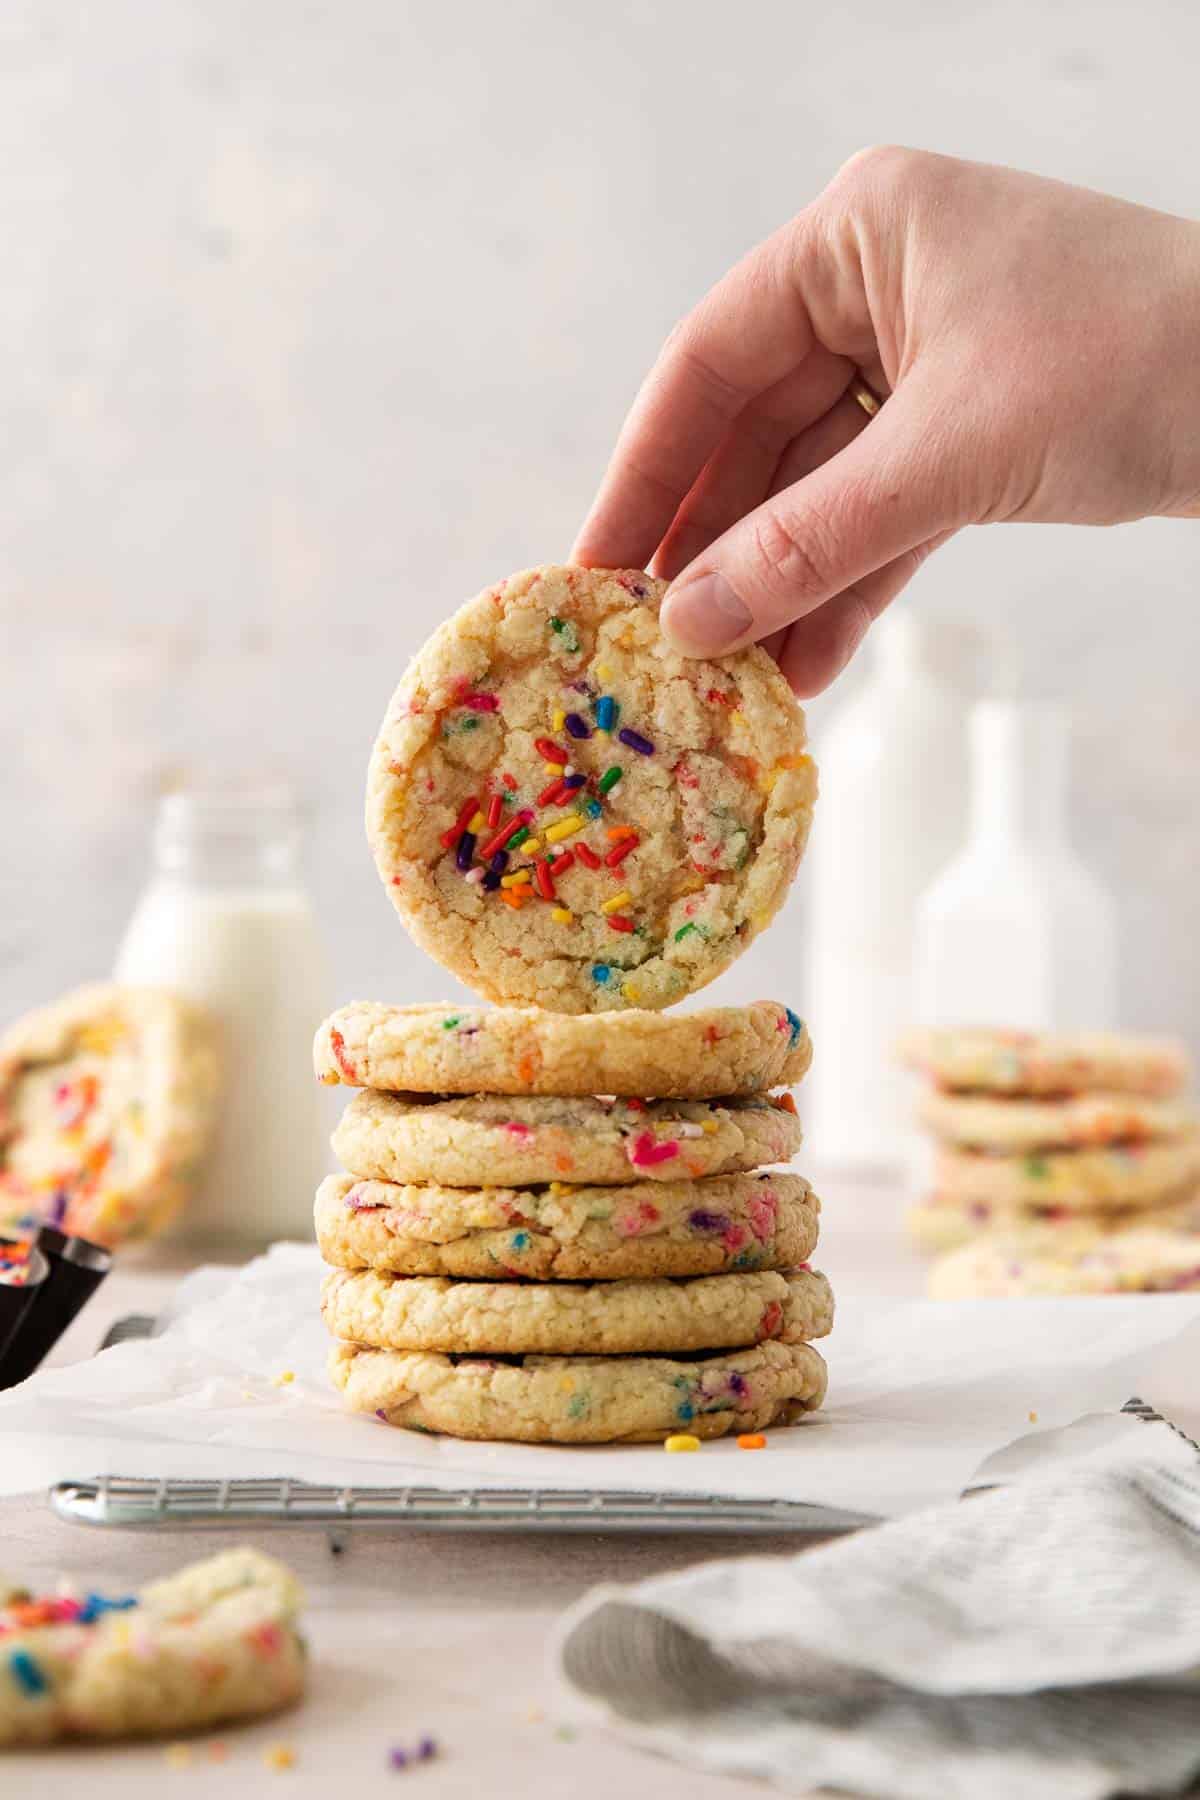 A stack of sugar cookies on parchment paper, with a hand picking up the top cookie